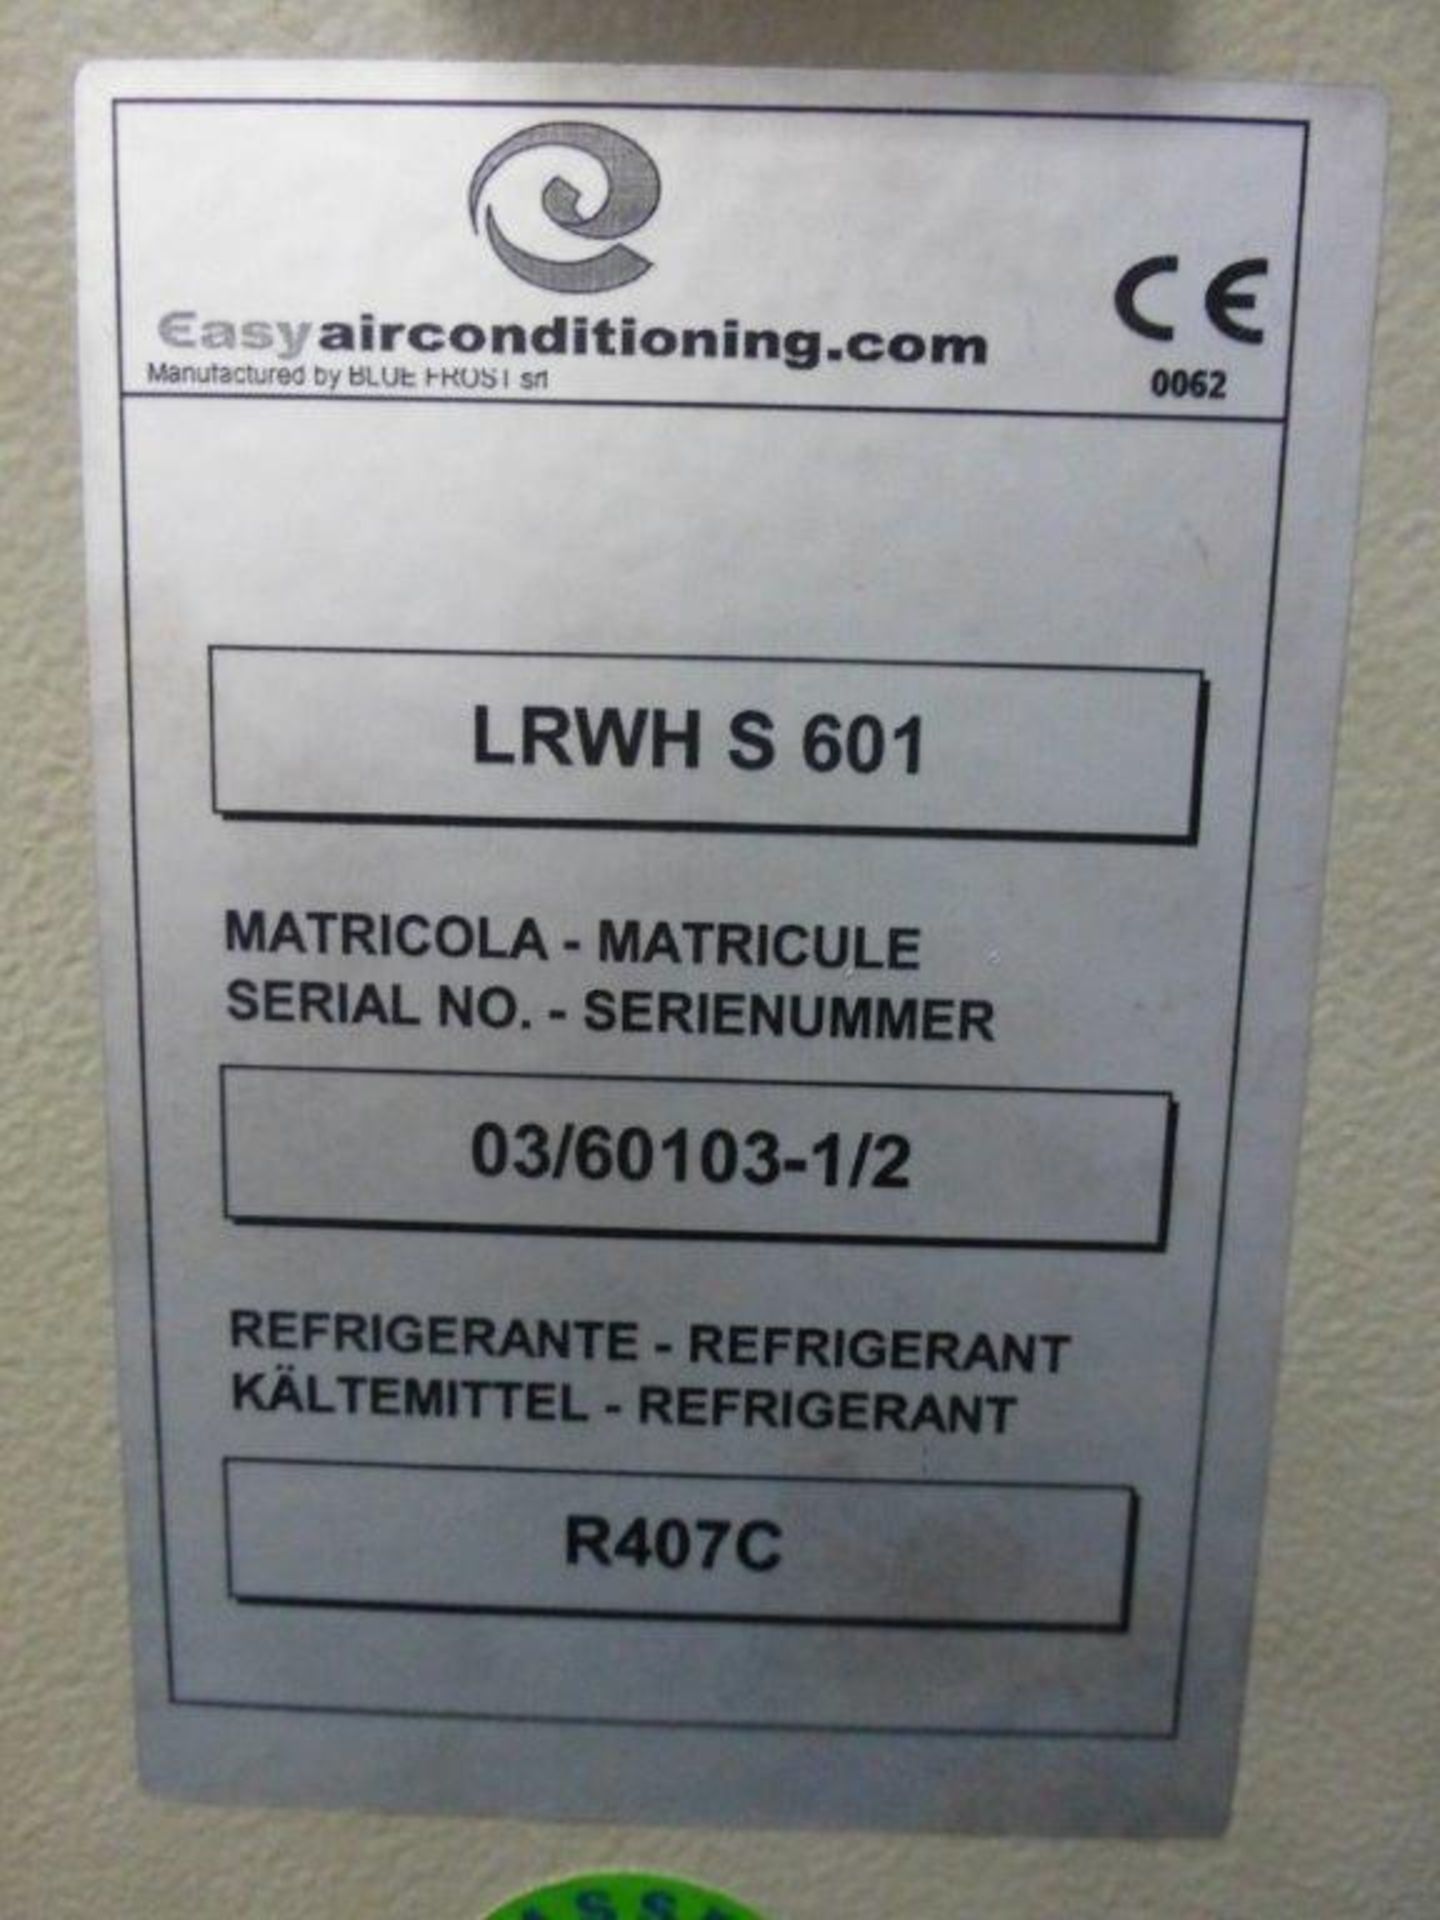 Easy Air Conditioning LRWH S 601 water chiller, serial No 03/60103-1/2, Chiller No 6, (Disconnection - Image 3 of 3